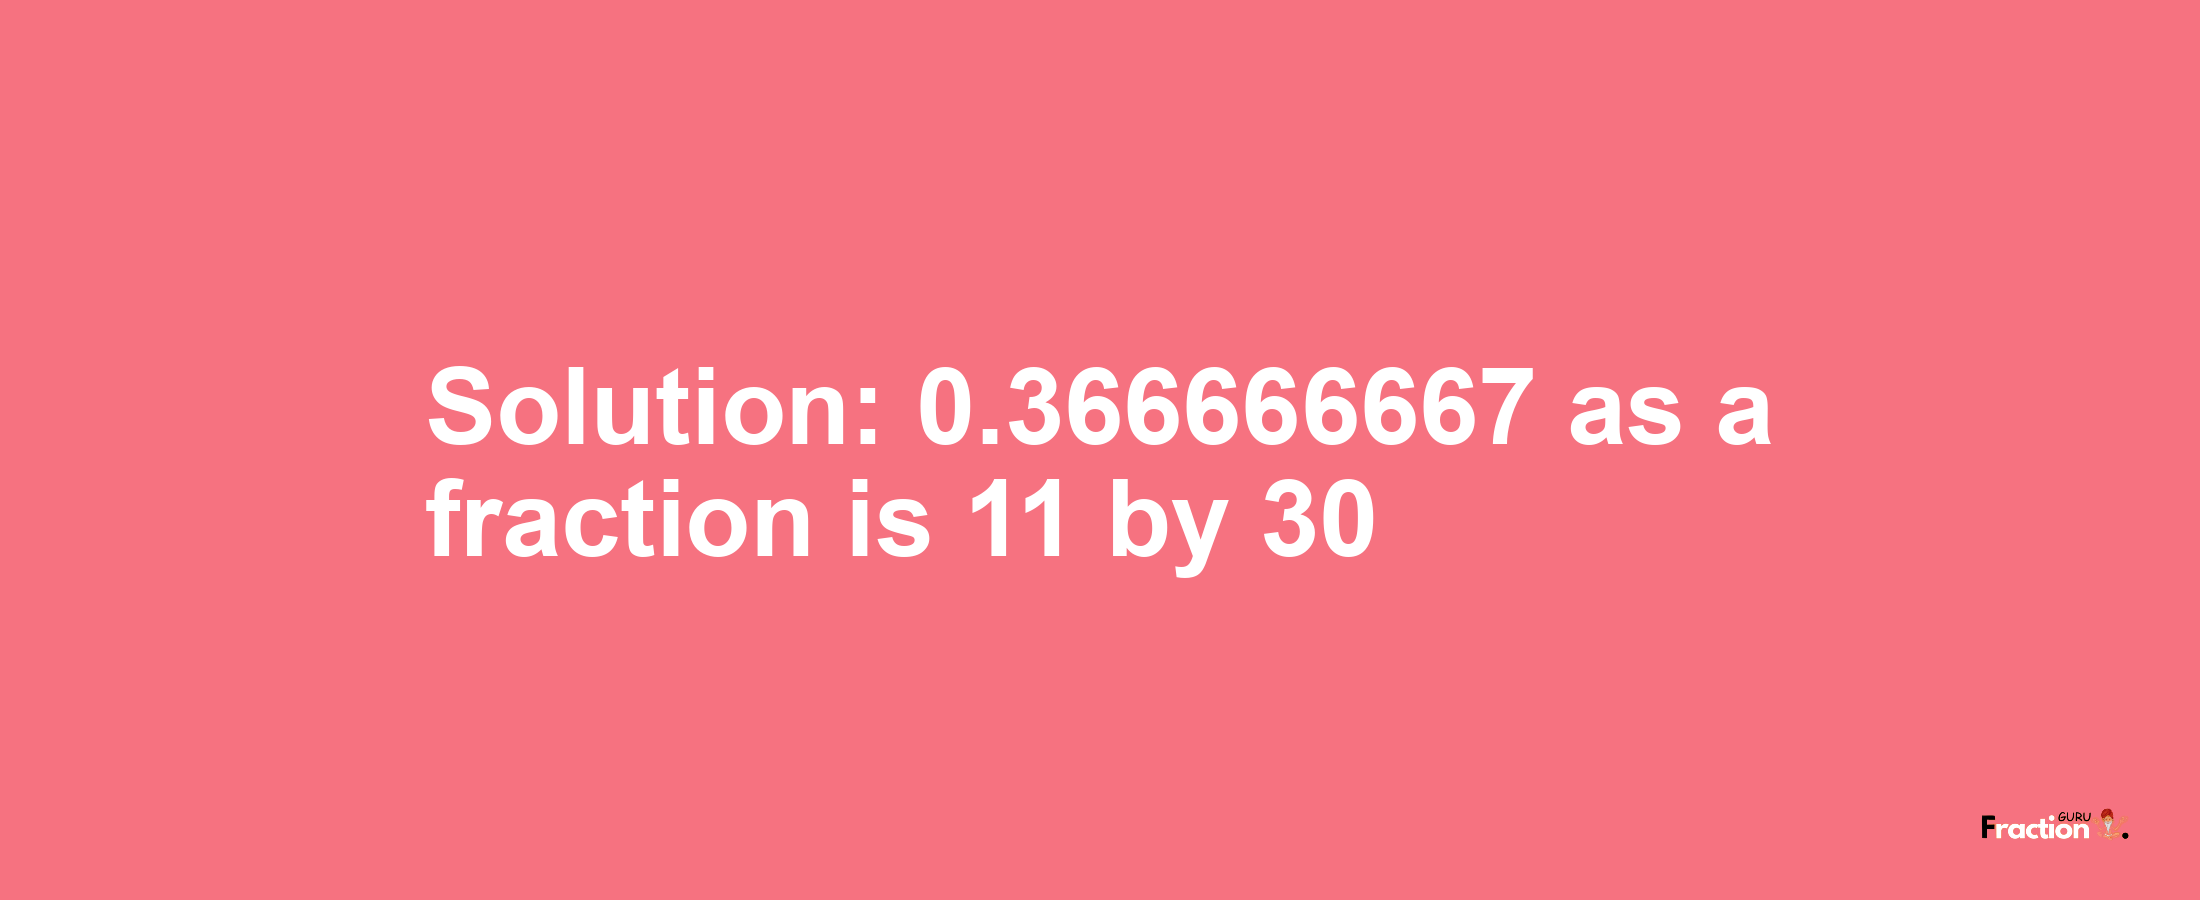 Solution:0.366666667 as a fraction is 11/30